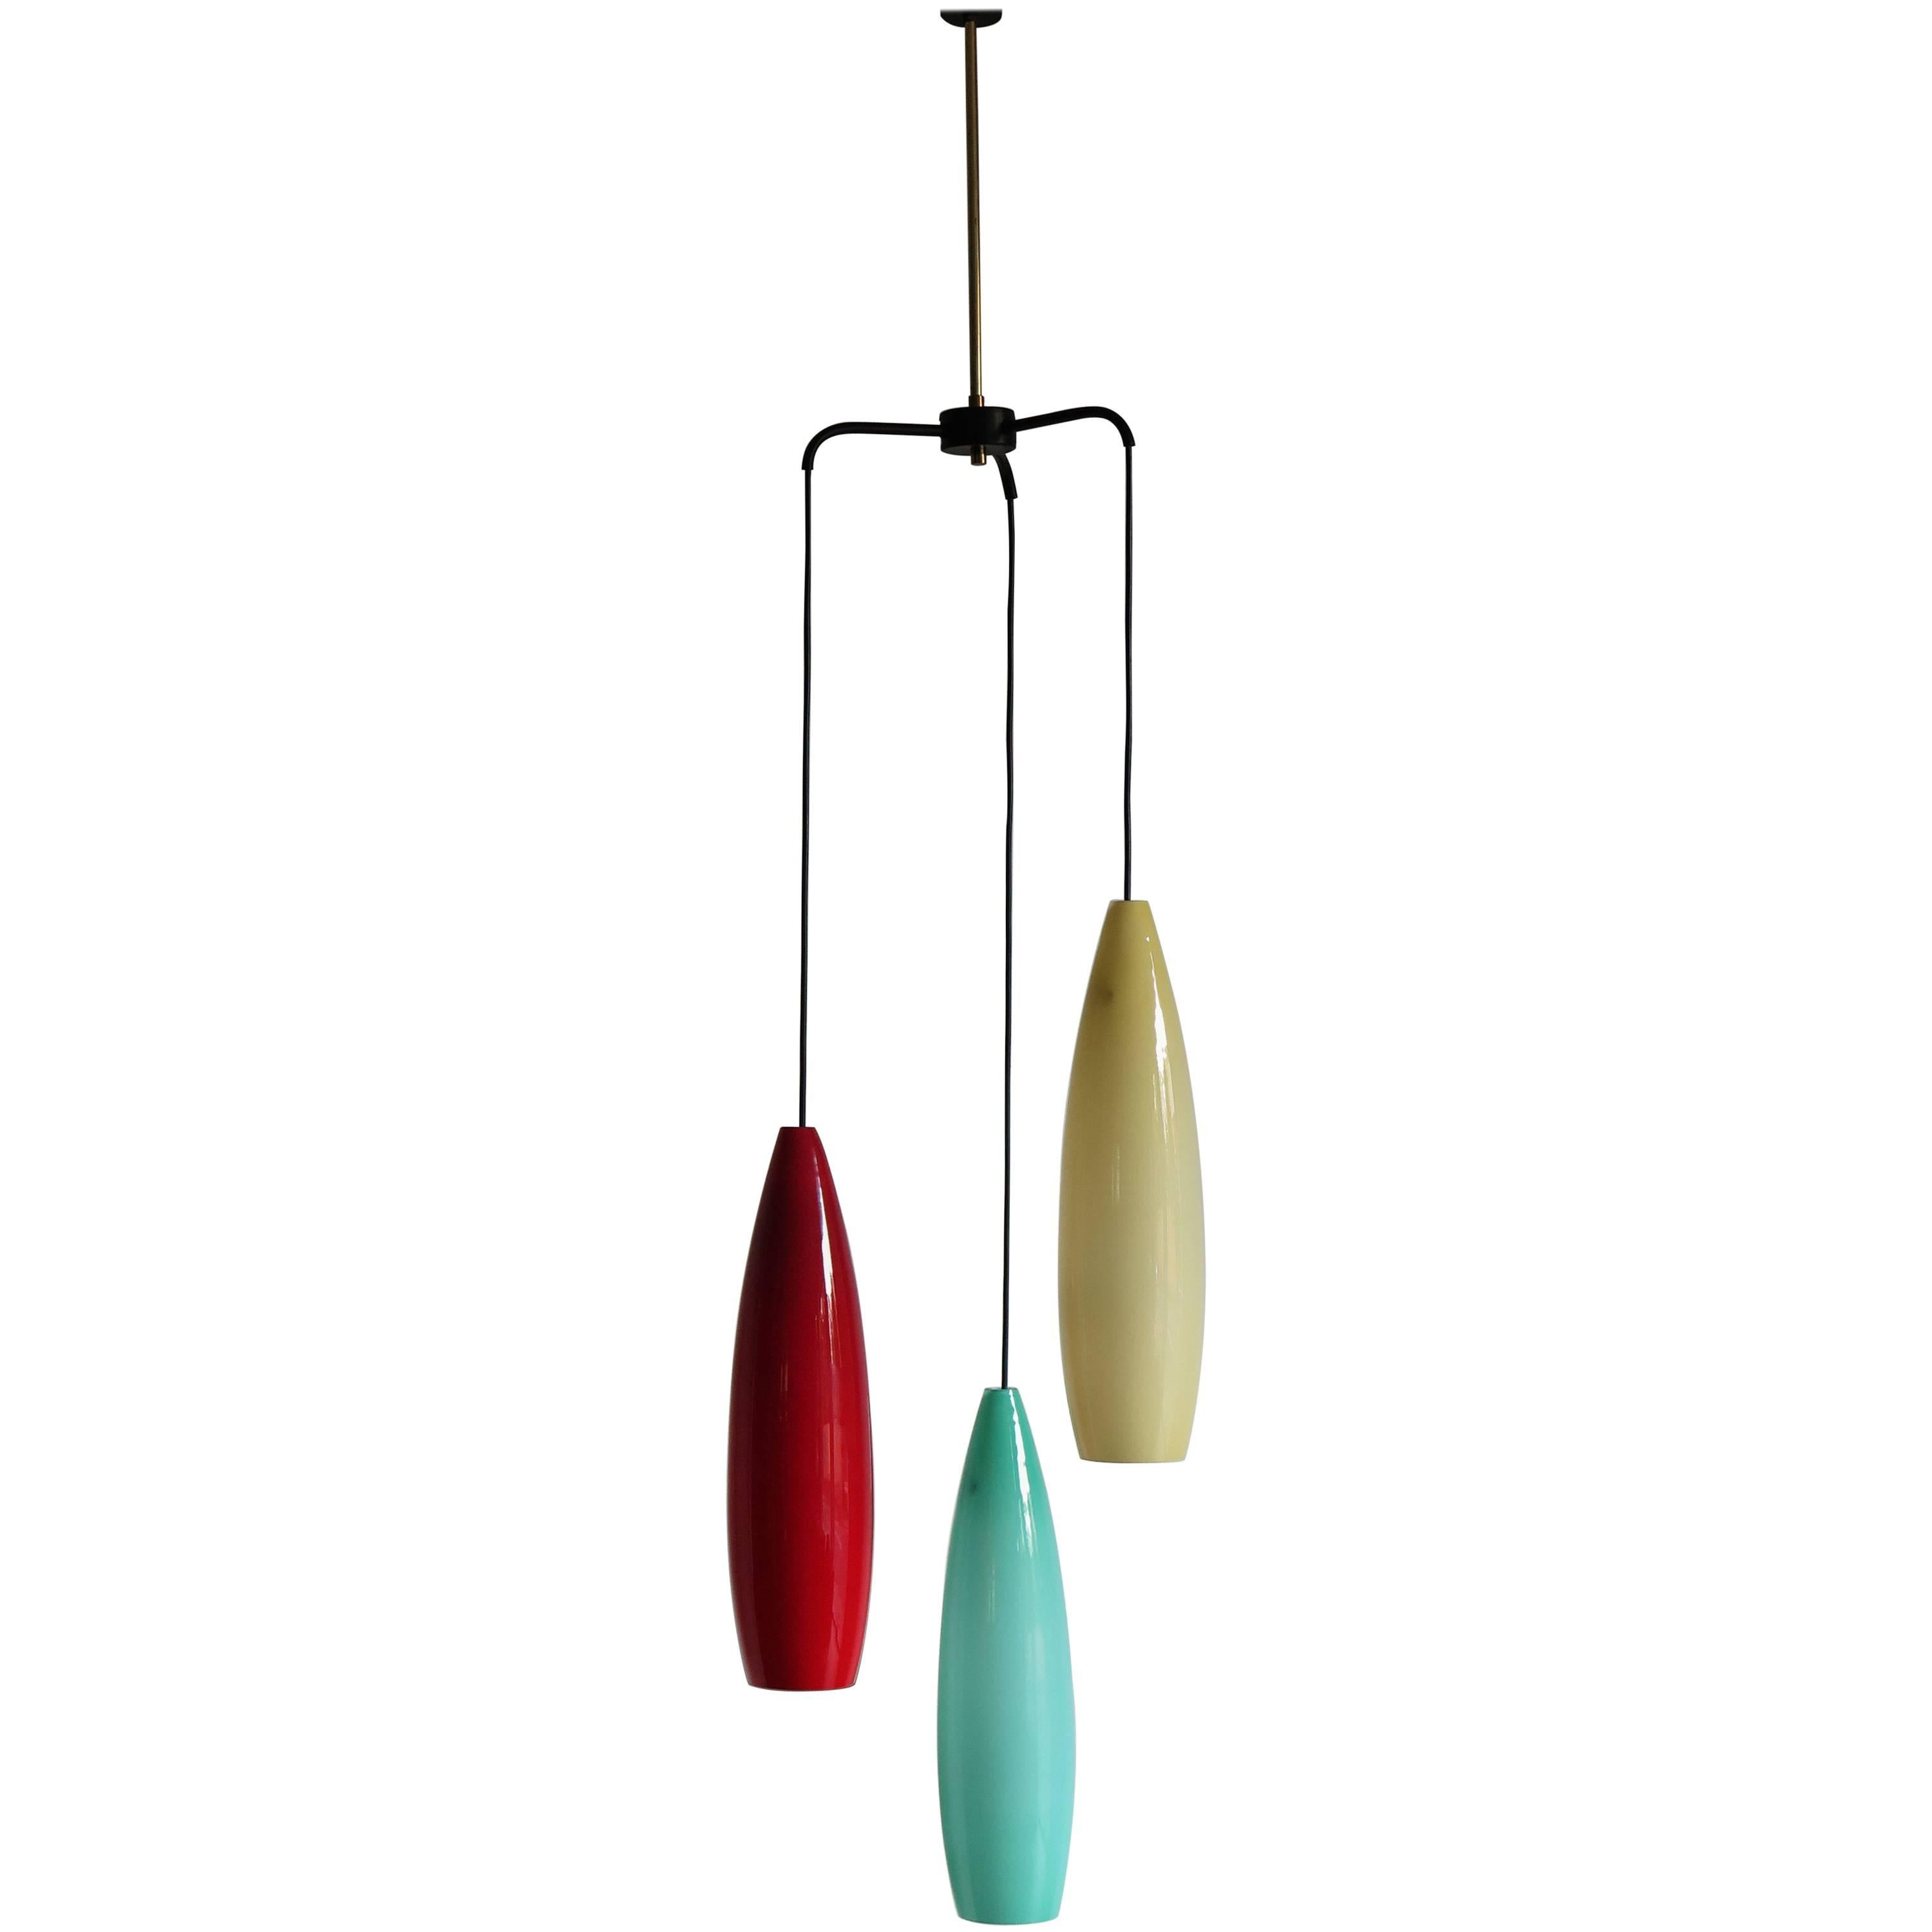 1950s Italian Glass Mid-Century Modern Pendant Lamp with Colored Diffusers